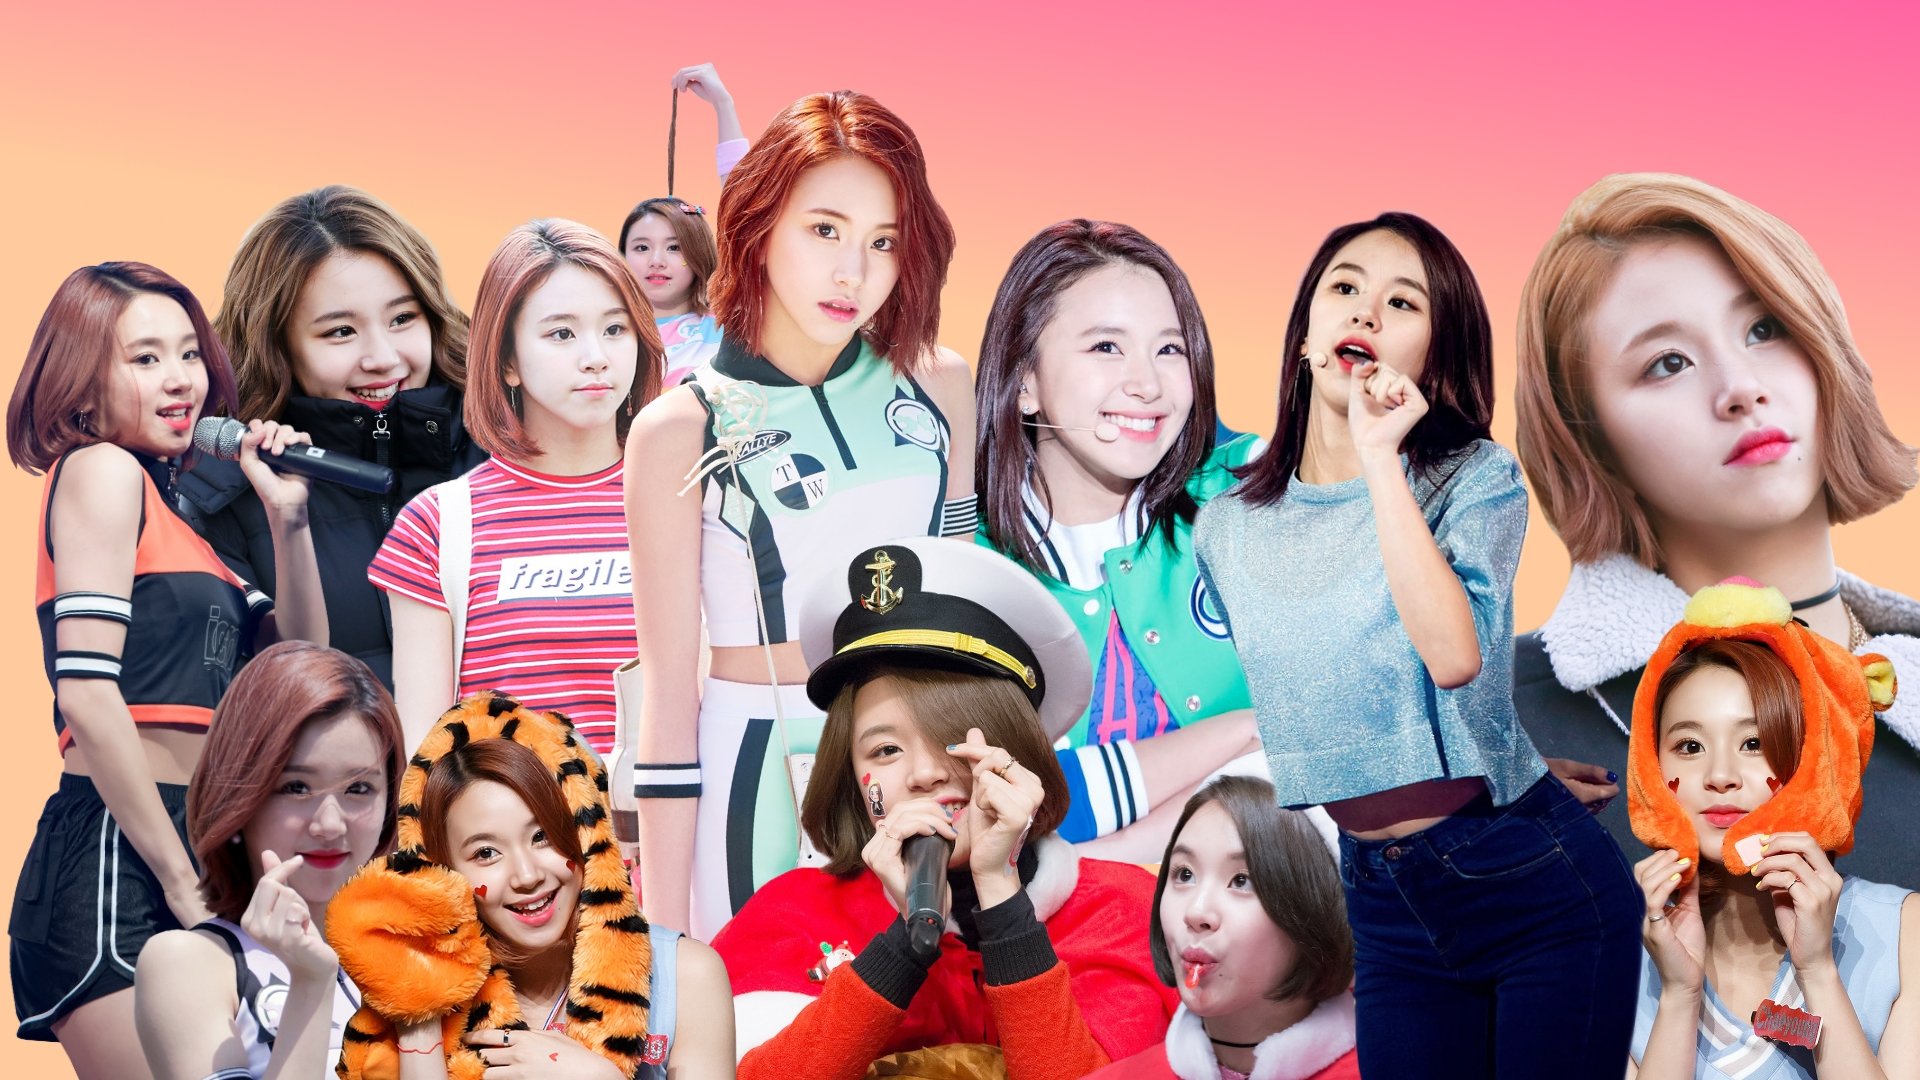 Chaeyoung Collage Wallpaper